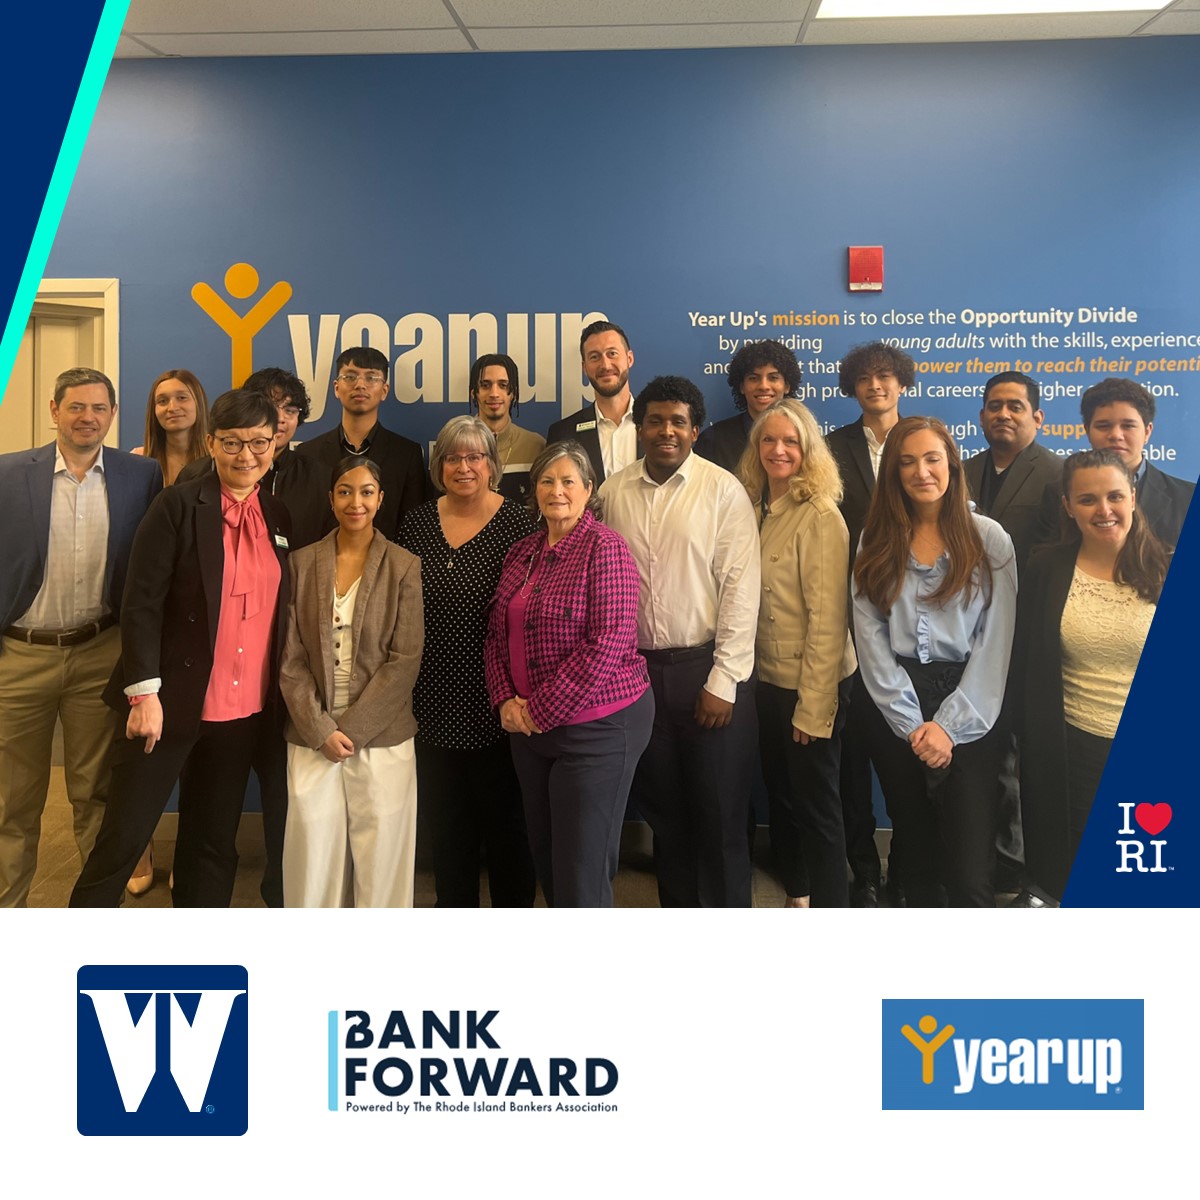 We are proud to support the BankForward initiative from the Rhode Island Bankers Association that aims to increase diversity, access, and representation across the banking sector in Rhode Island! _______________ What we value is you.™ #WashTrust #community #futureleaders